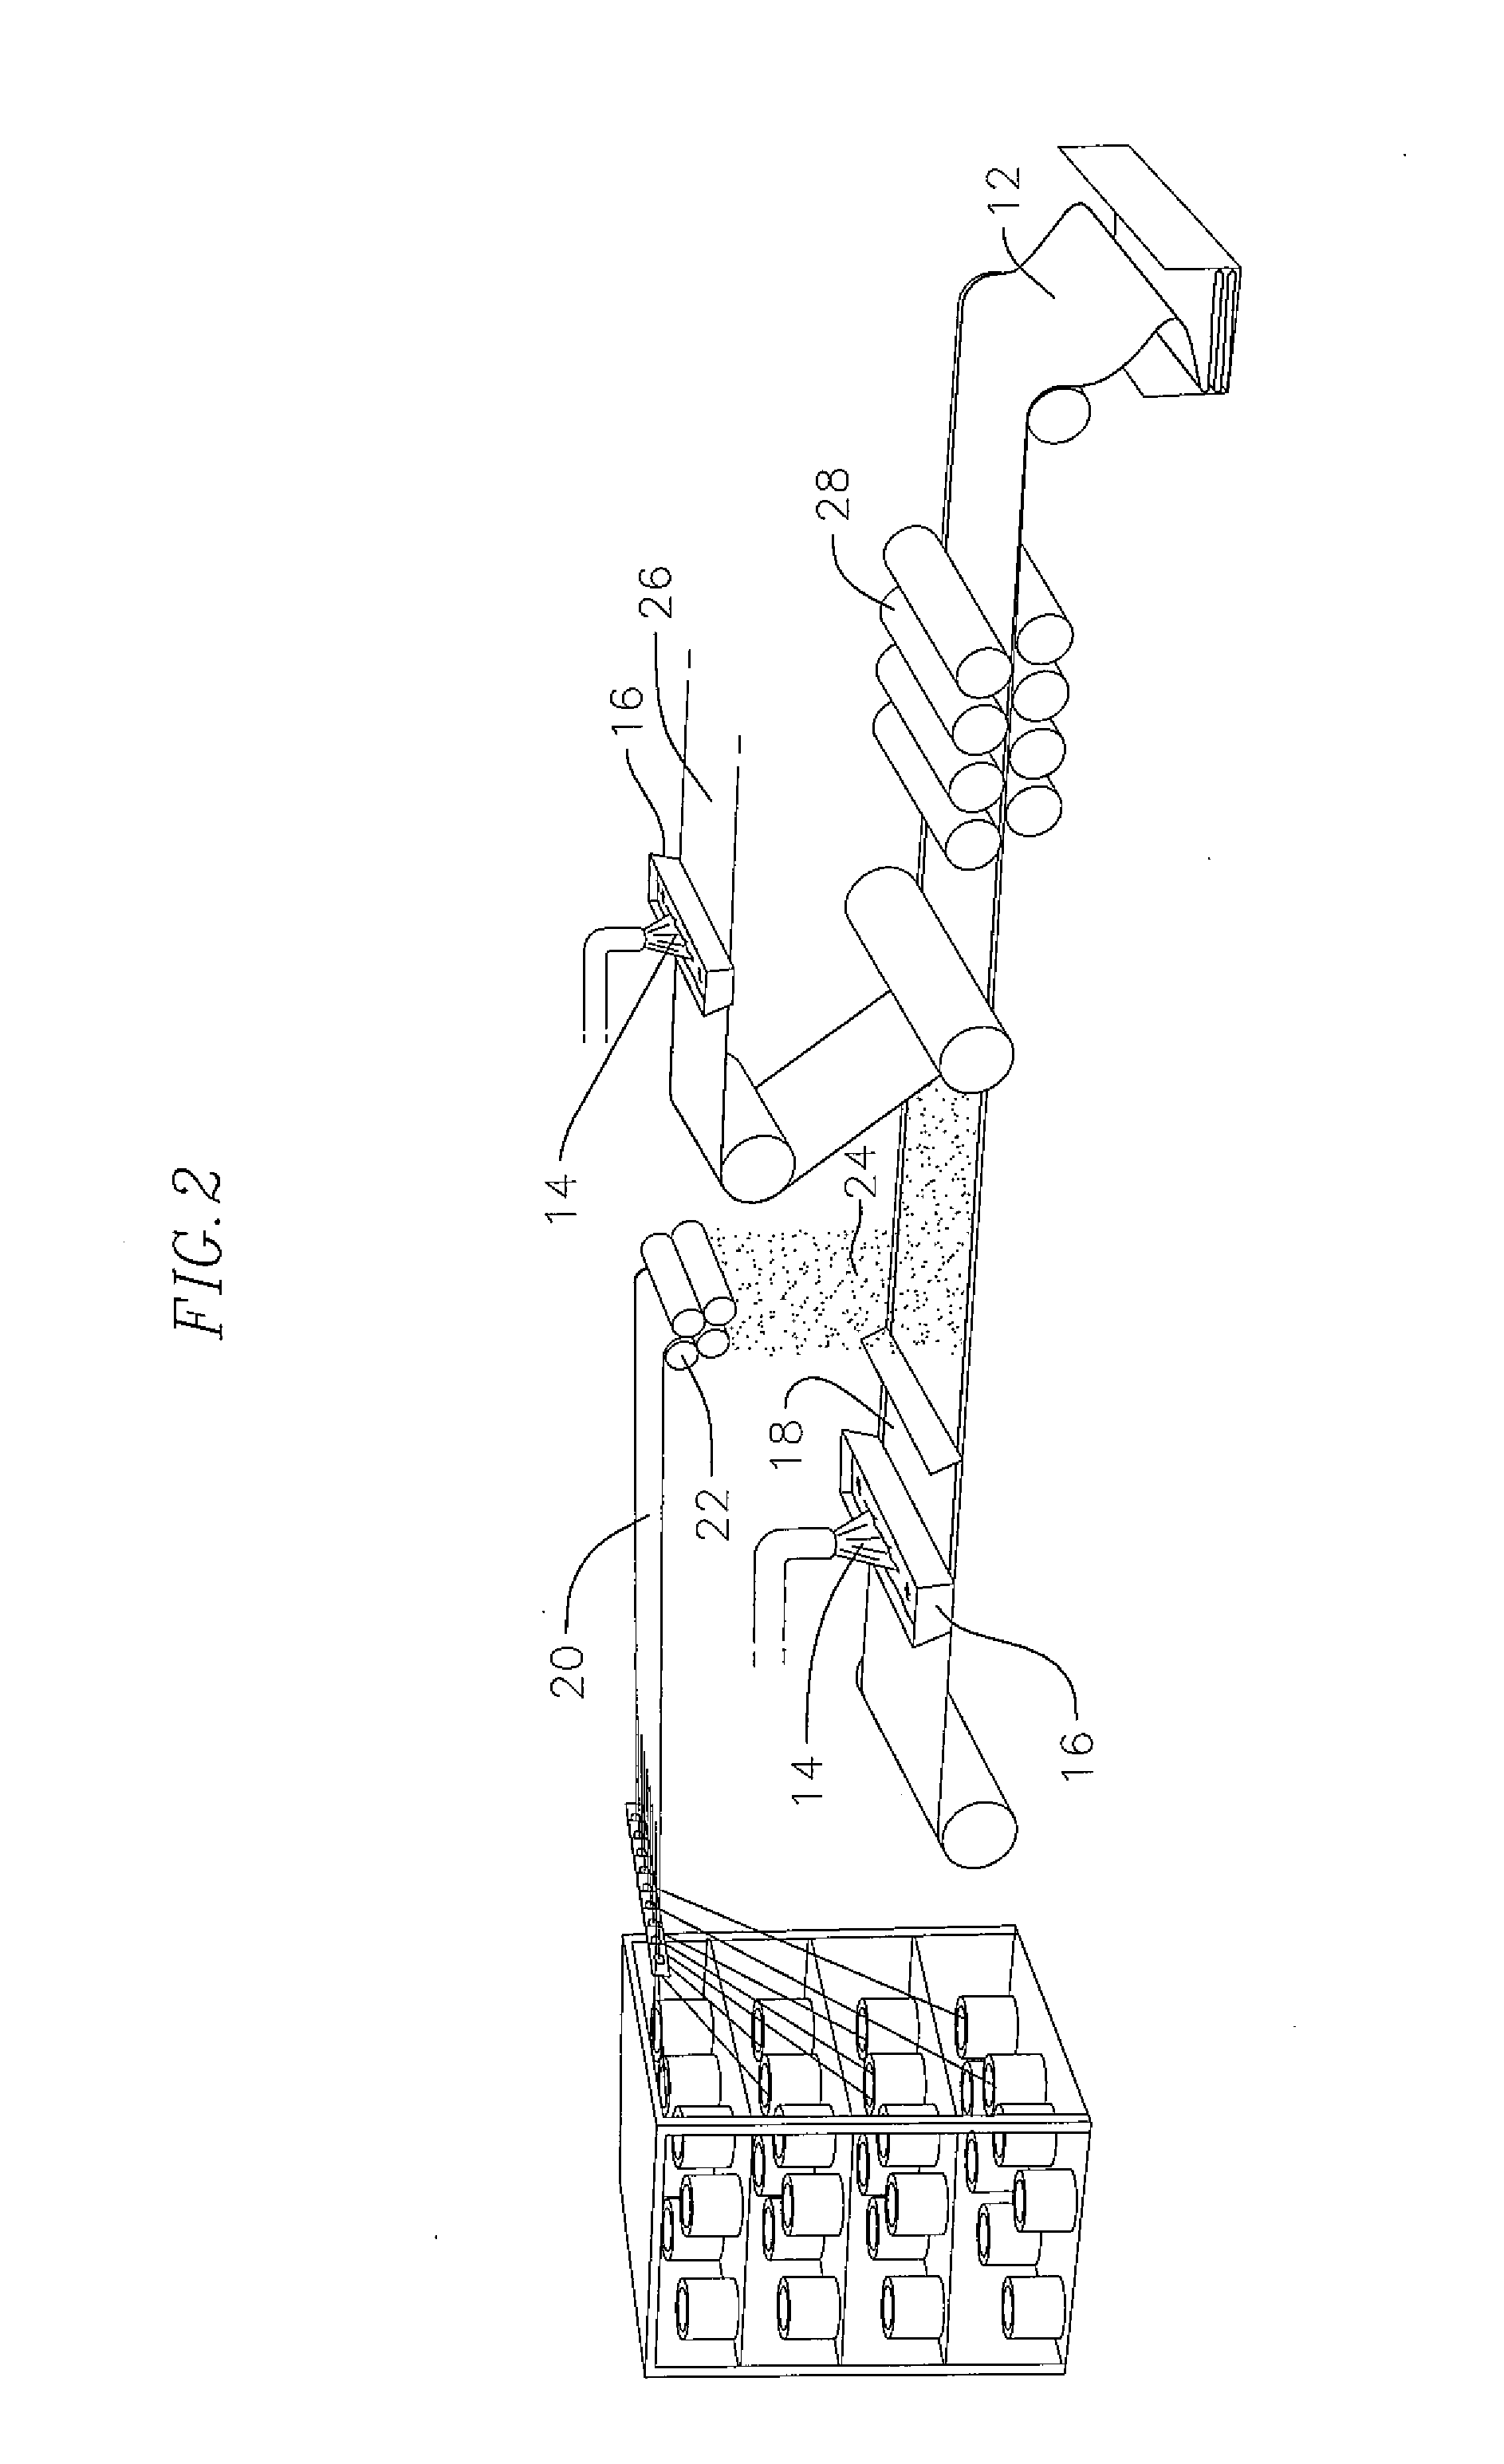 Method of manufacturing a thermoset polymer utility vault lid